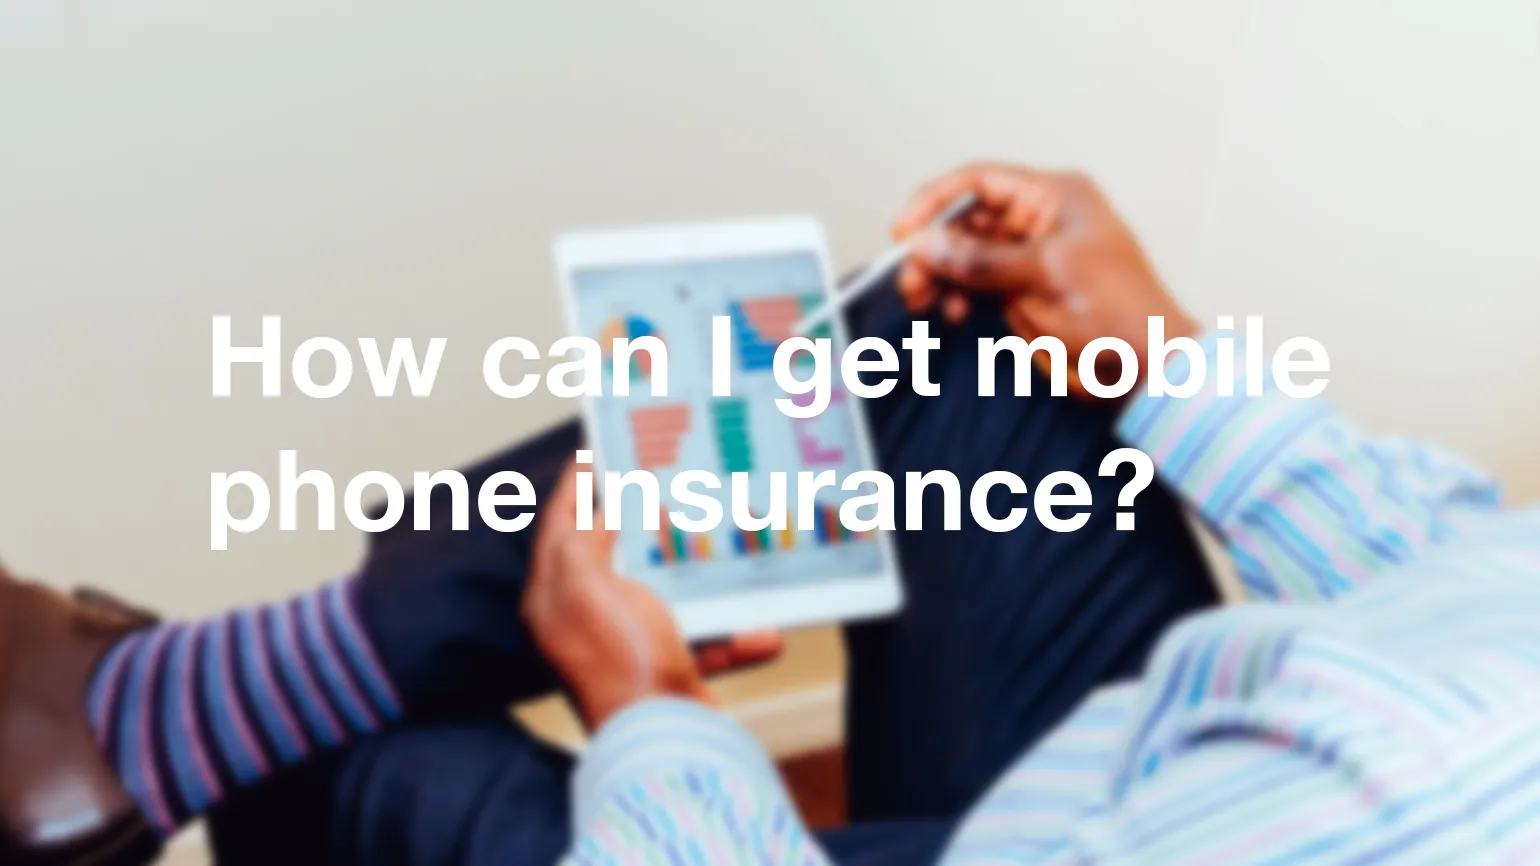 How can I get mobile phone insurance?